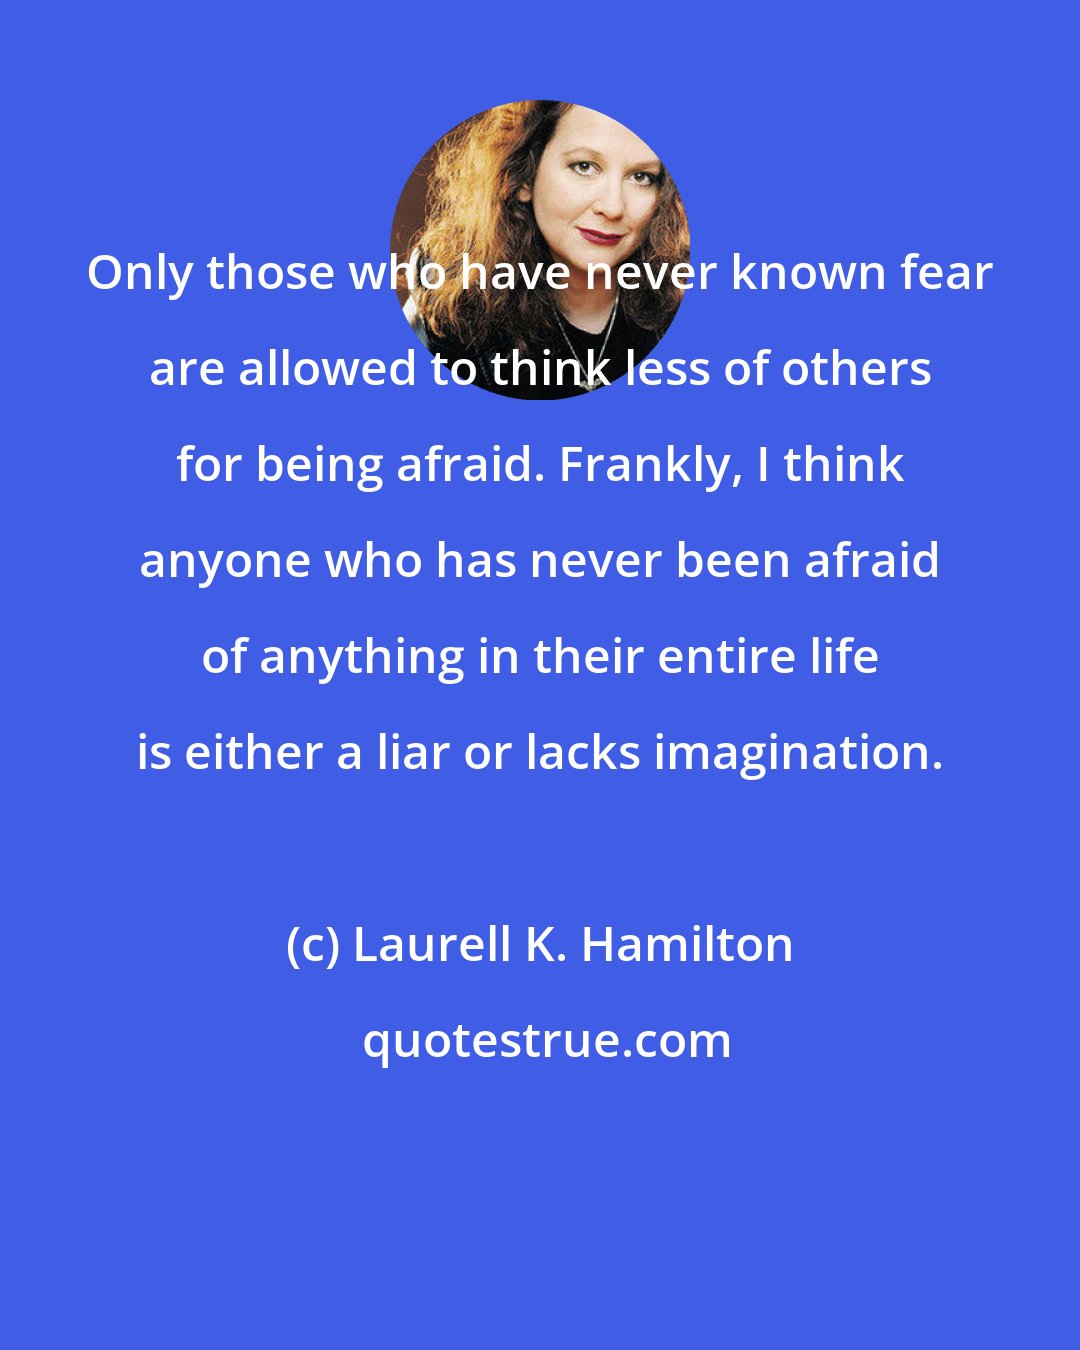 Laurell K. Hamilton: Only those who have never known fear are allowed to think less of others for being afraid. Frankly, I think anyone who has never been afraid of anything in their entire life is either a liar or lacks imagination.